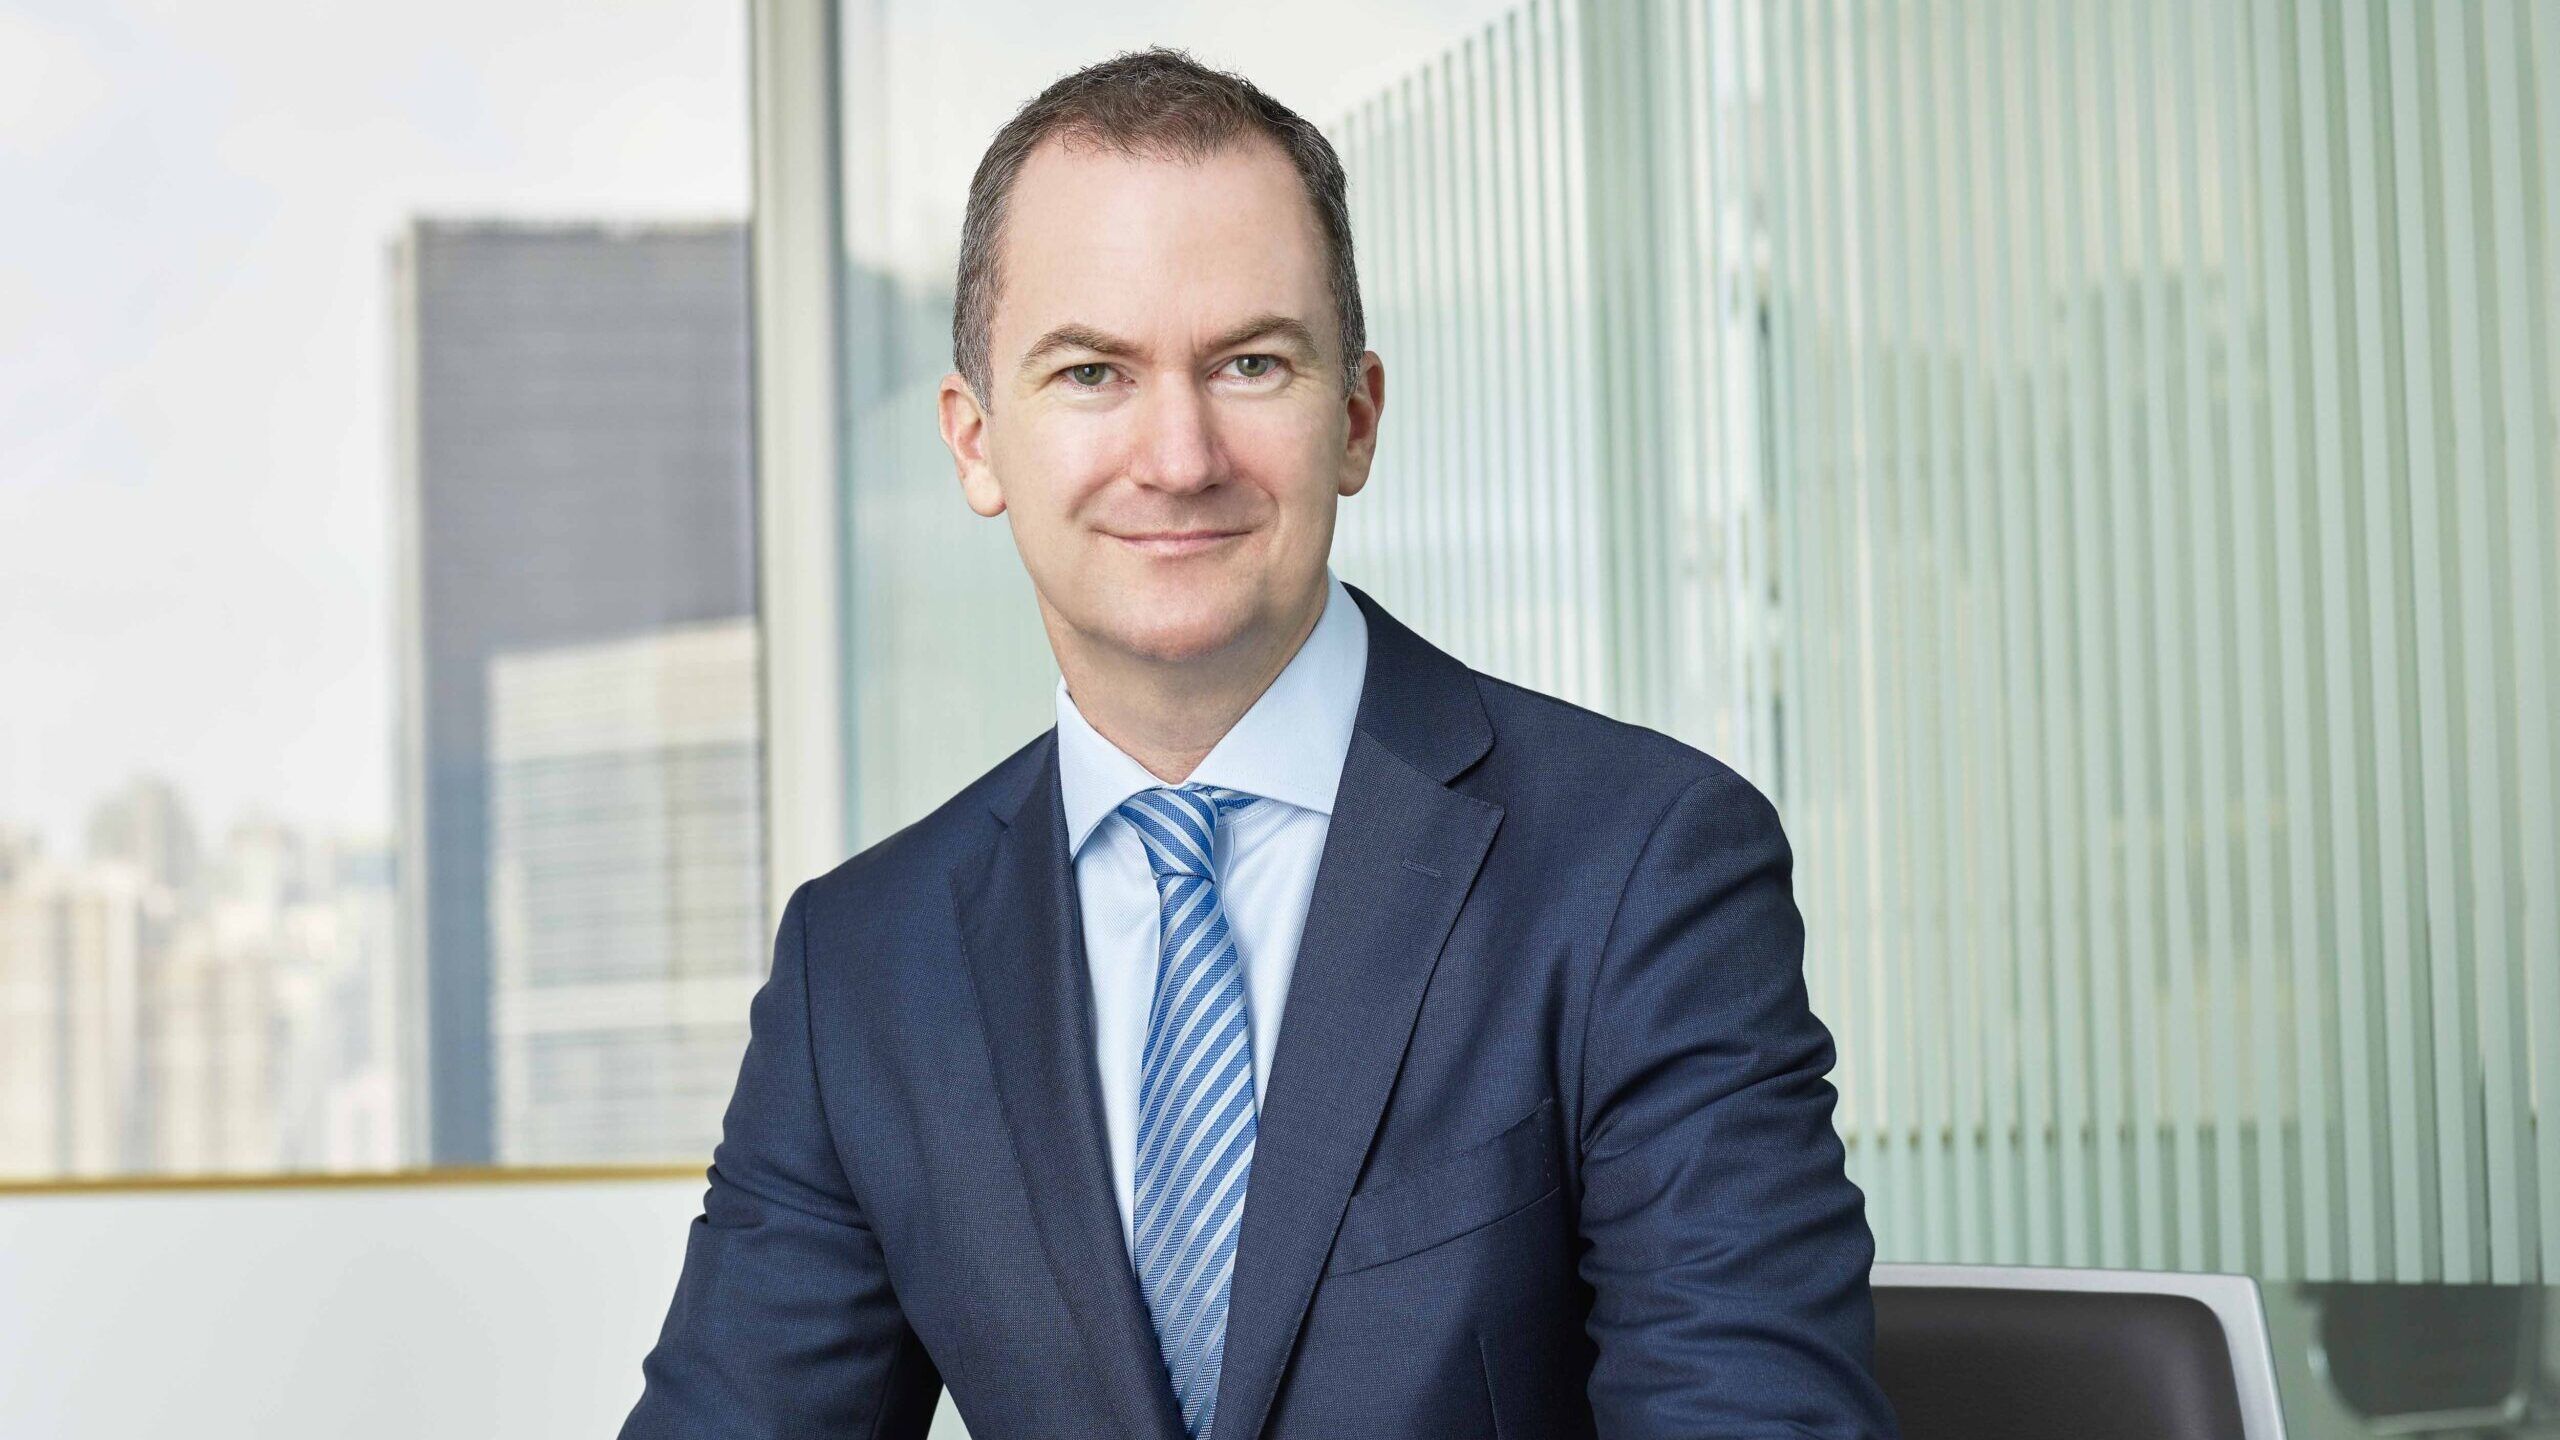 Schroders appoints Asia Pacific CEO